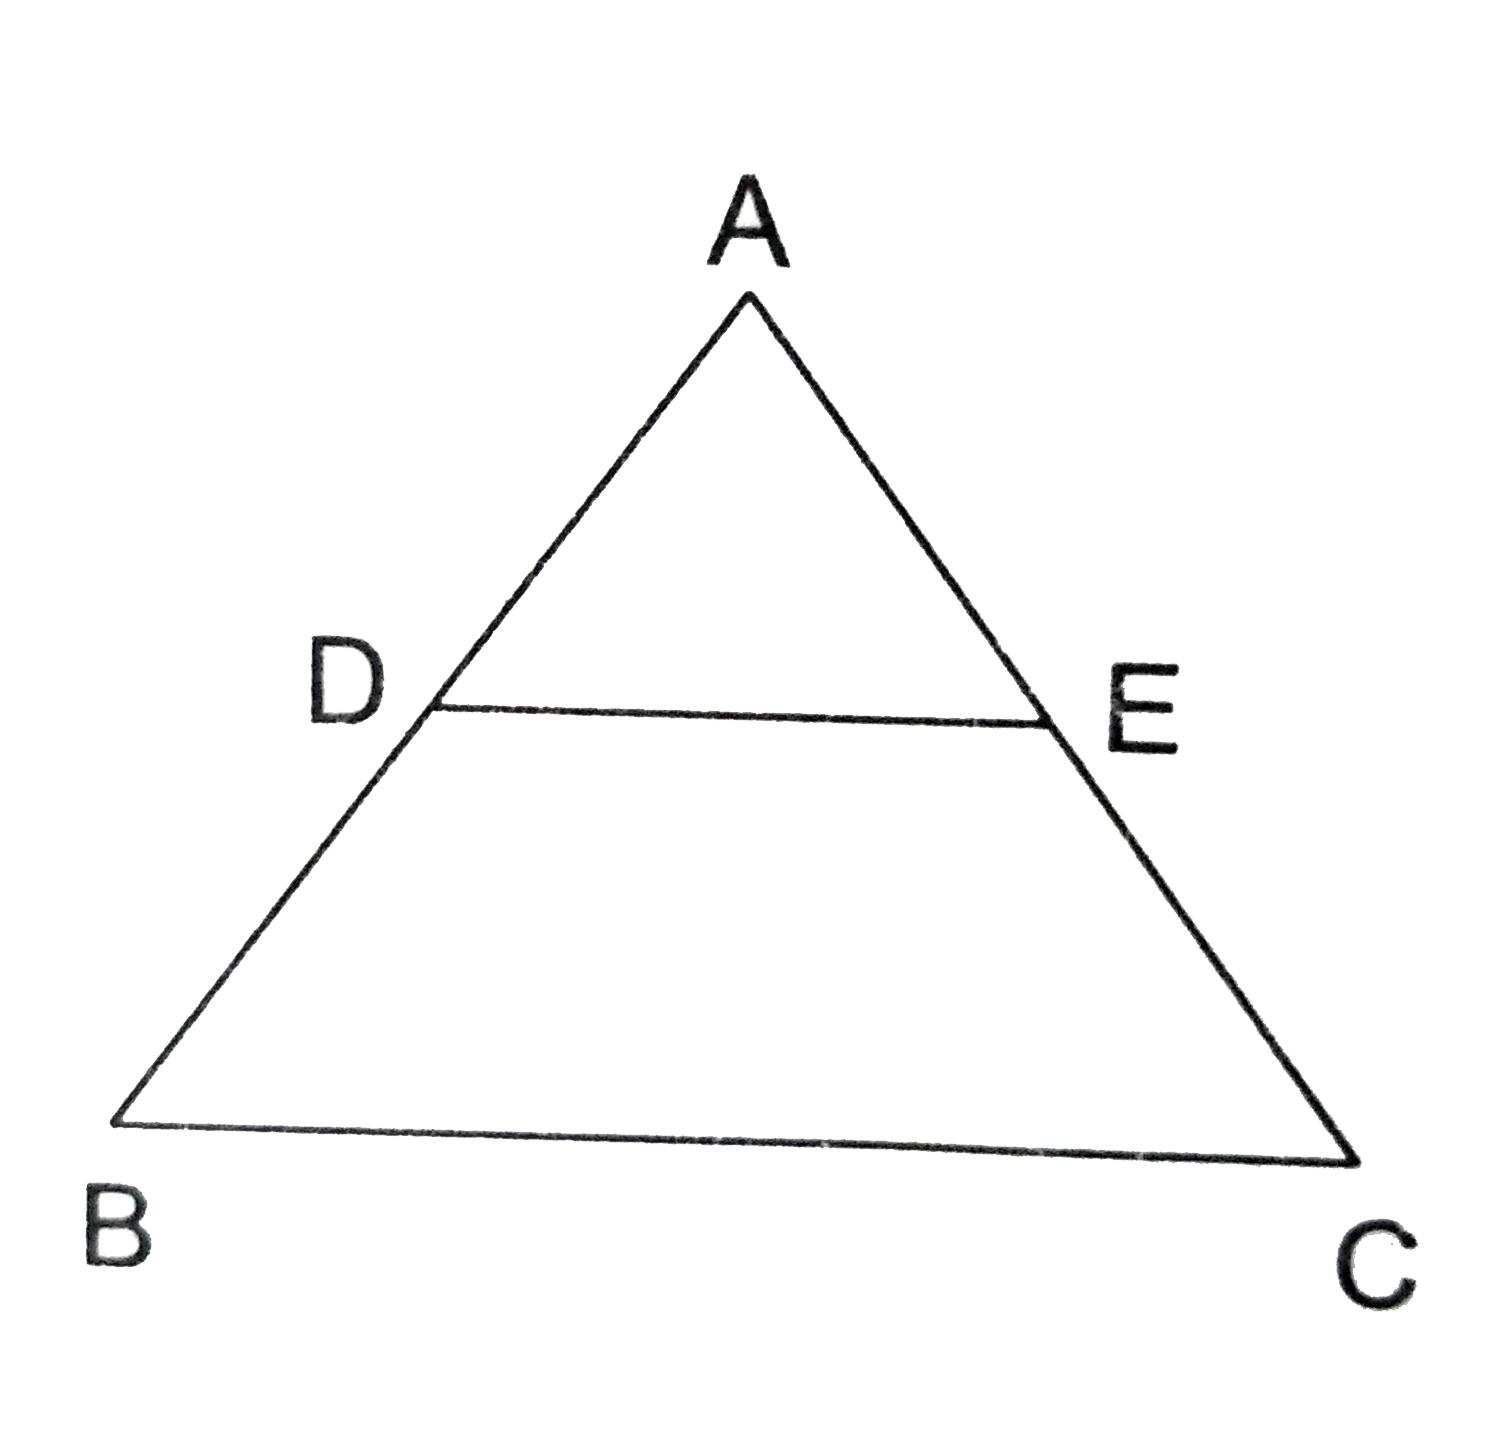 The Line Segment Joining The Mid Points Of Any Two Sides Of A Triangle 2936